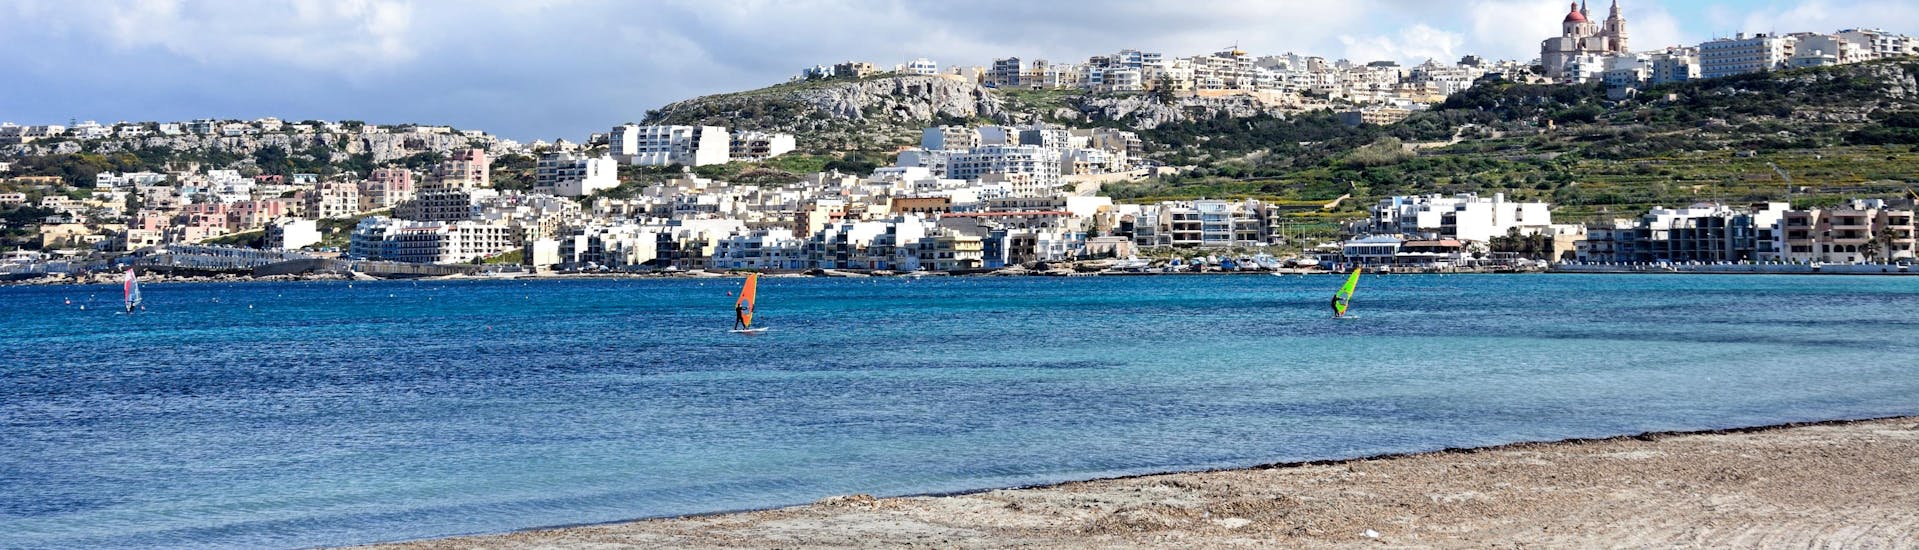 Two windsurfers in the Mediterranean See